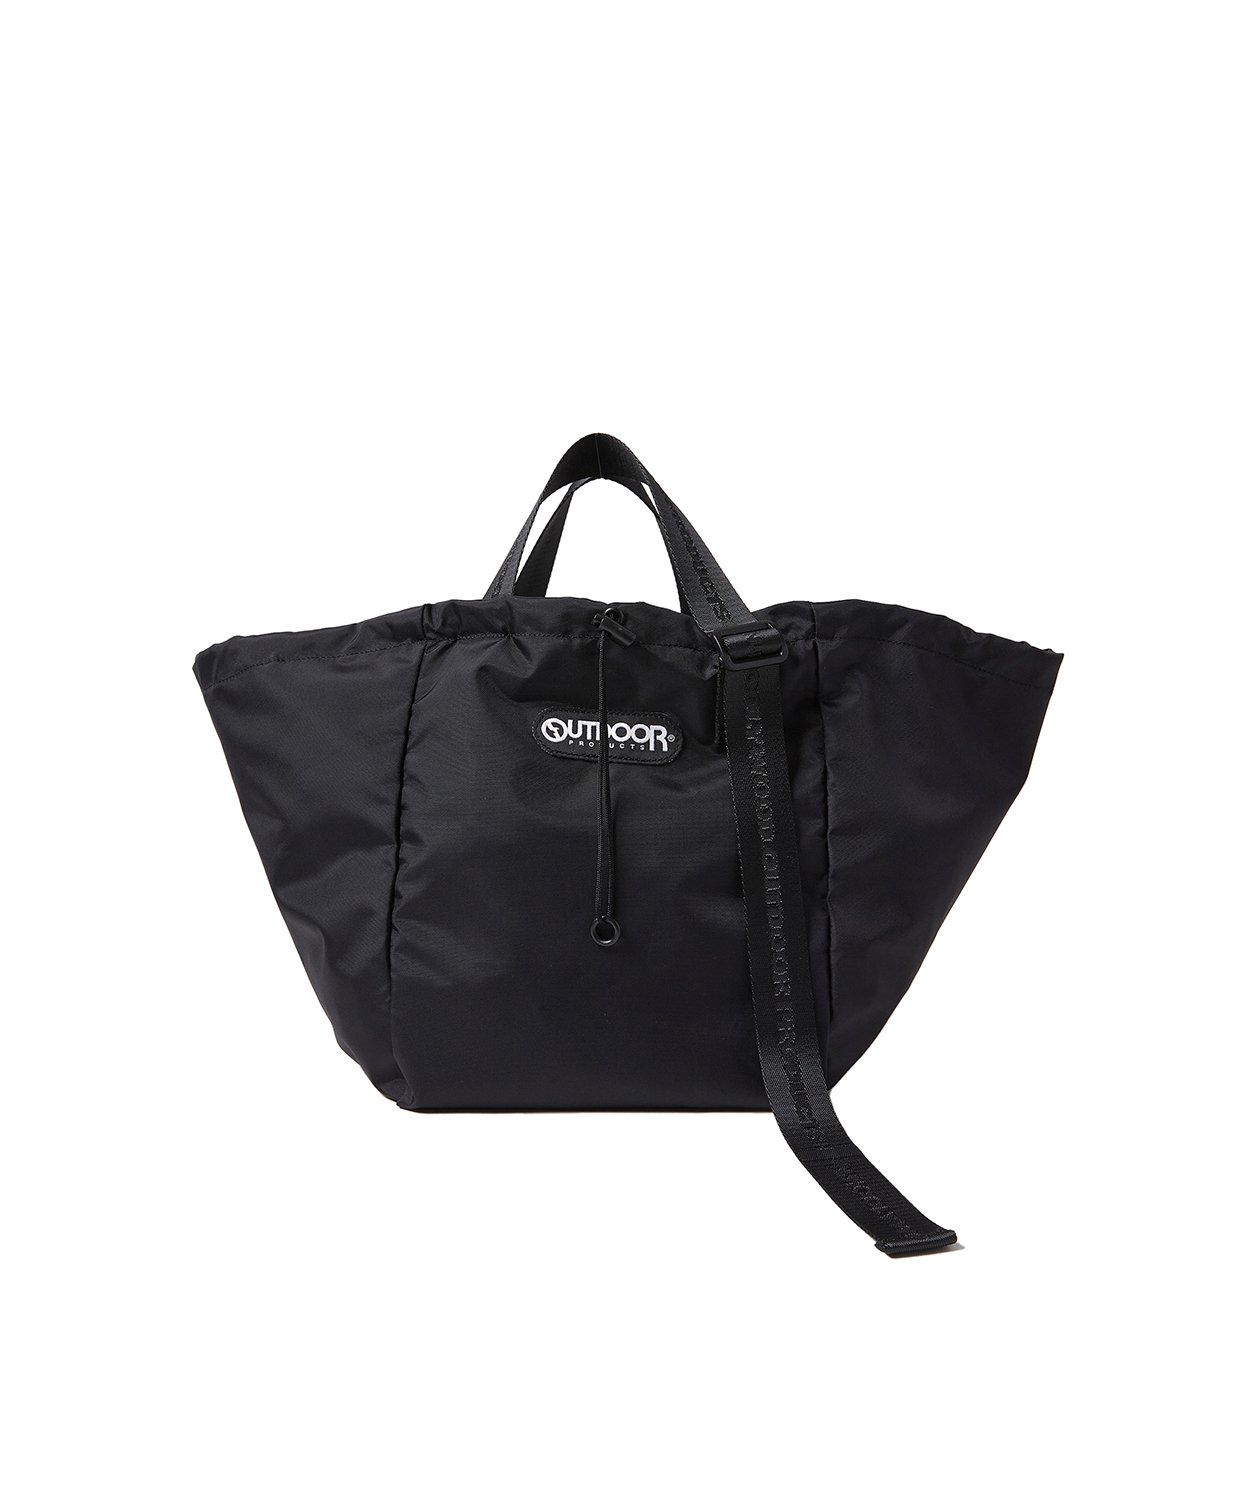 N.HOOLYWOOD COMPILE and OUTDOOR PRODUCTS Release Two Tote Bags for 